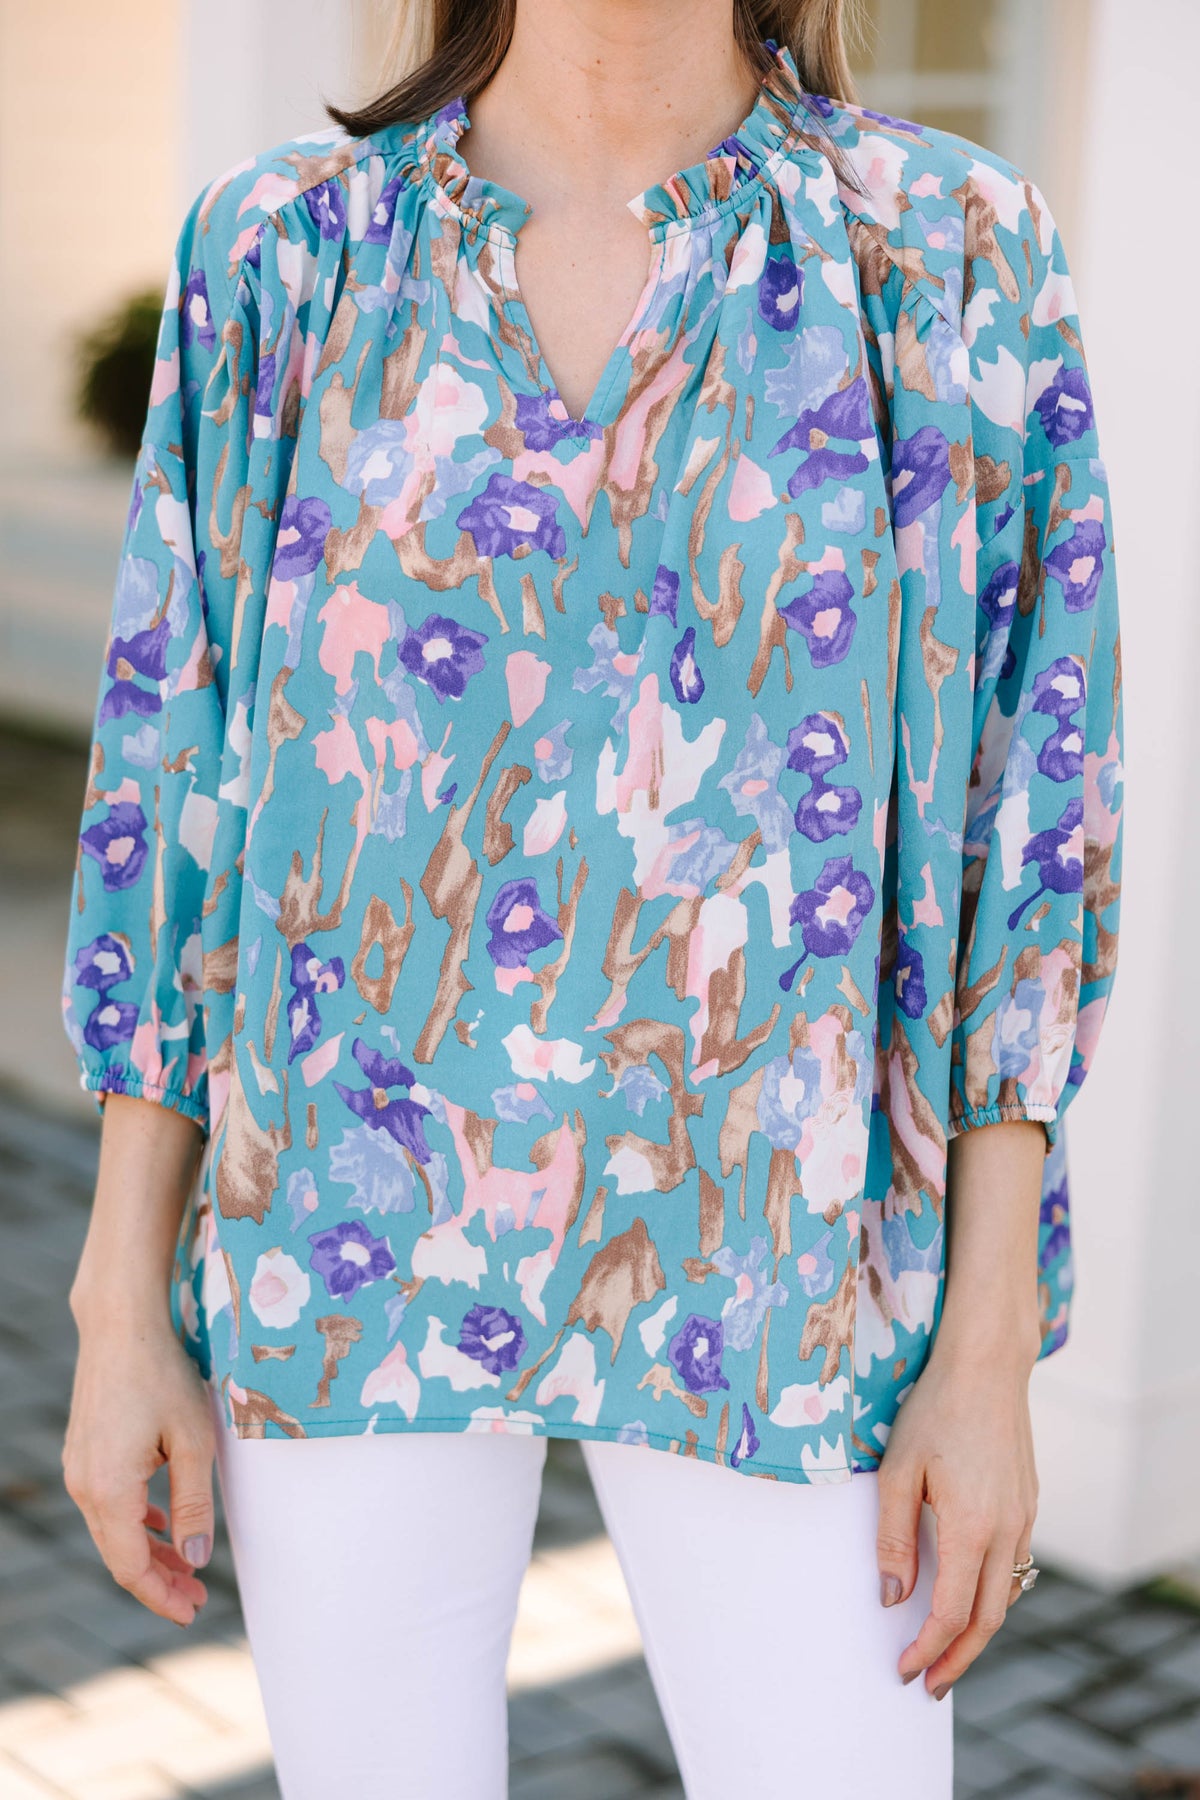 Take You With Me Teal Blue Floral Blouse – Shop the Mint